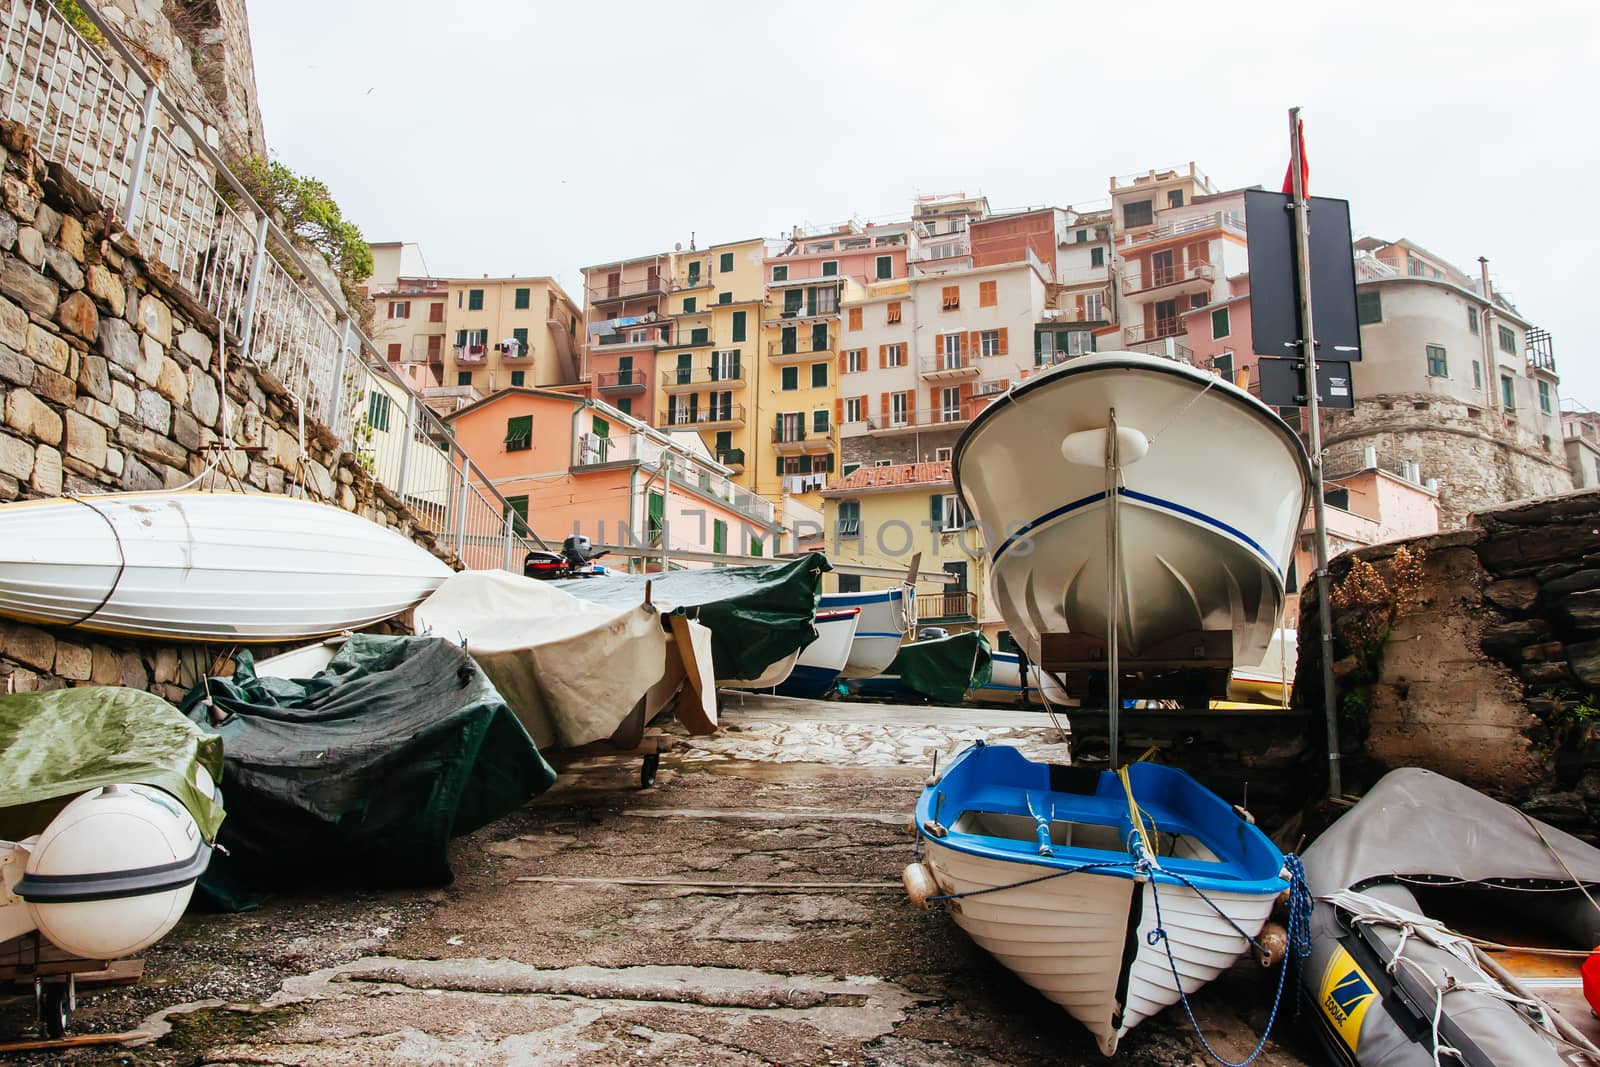 Manarola waterfront on a stormy day in the Cinque Terre, Italy